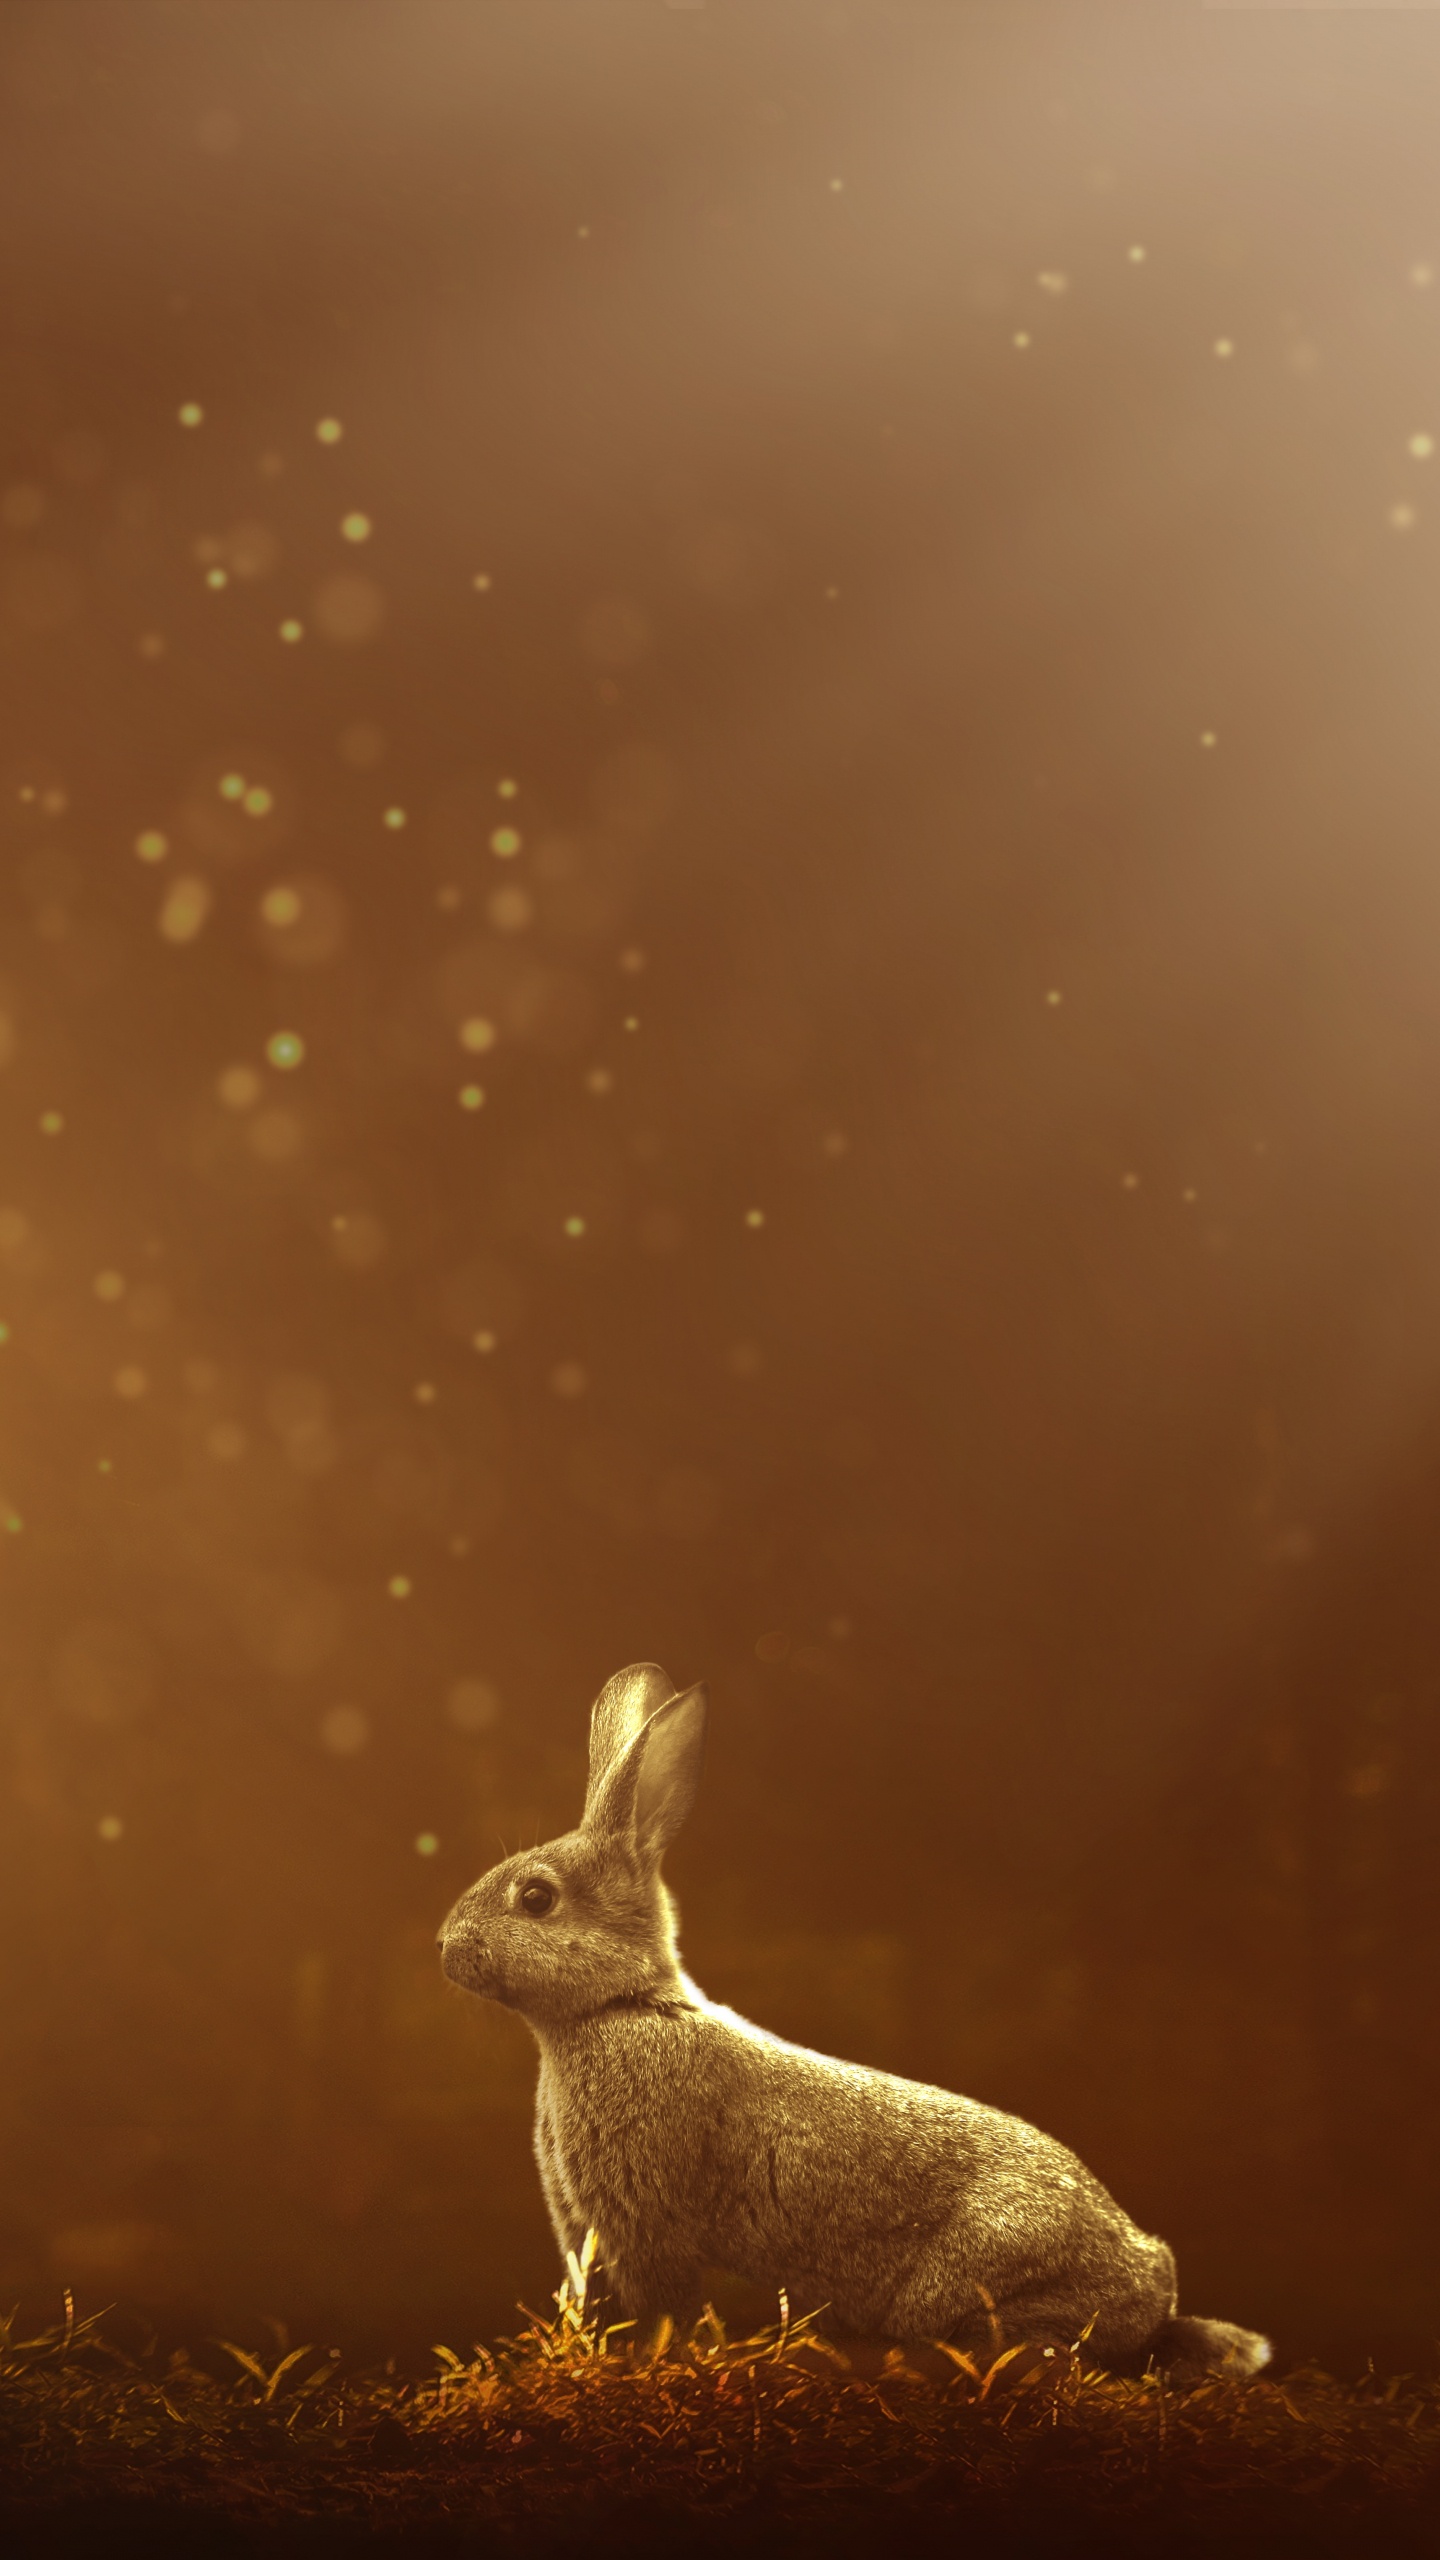 White Rabbit on Brown Grass Field During Night Time. Wallpaper in 1440x2560 Resolution